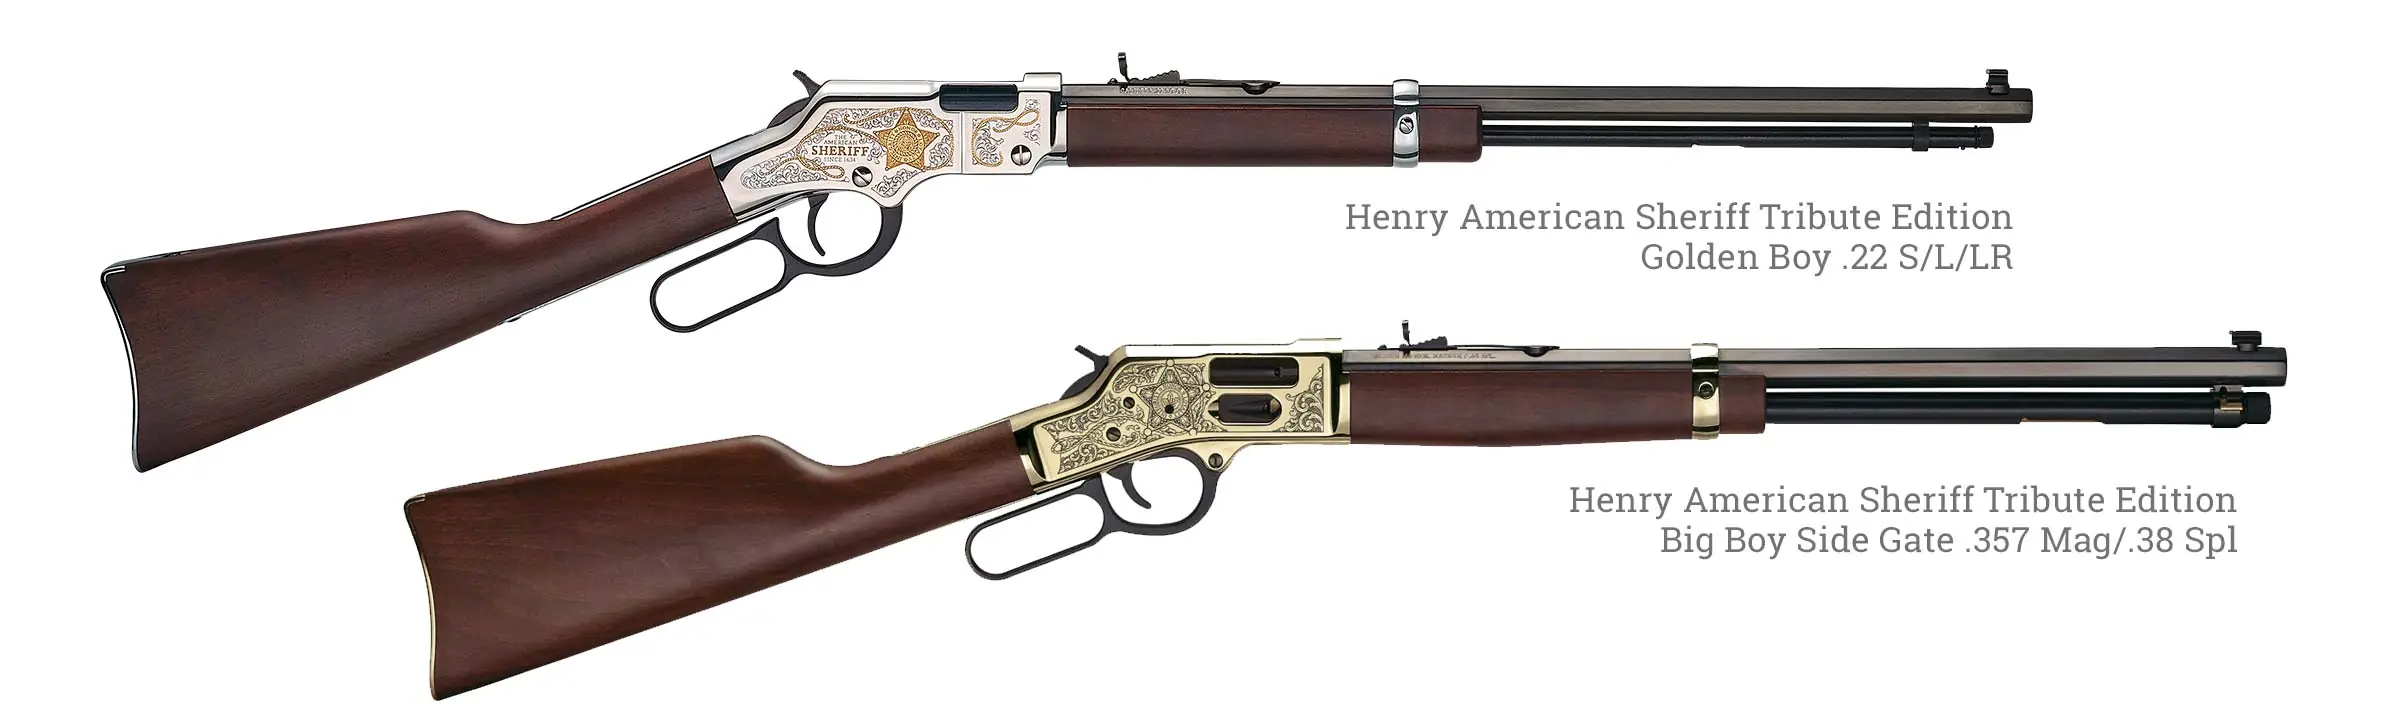 Henry American Sheriff Tribute Edition